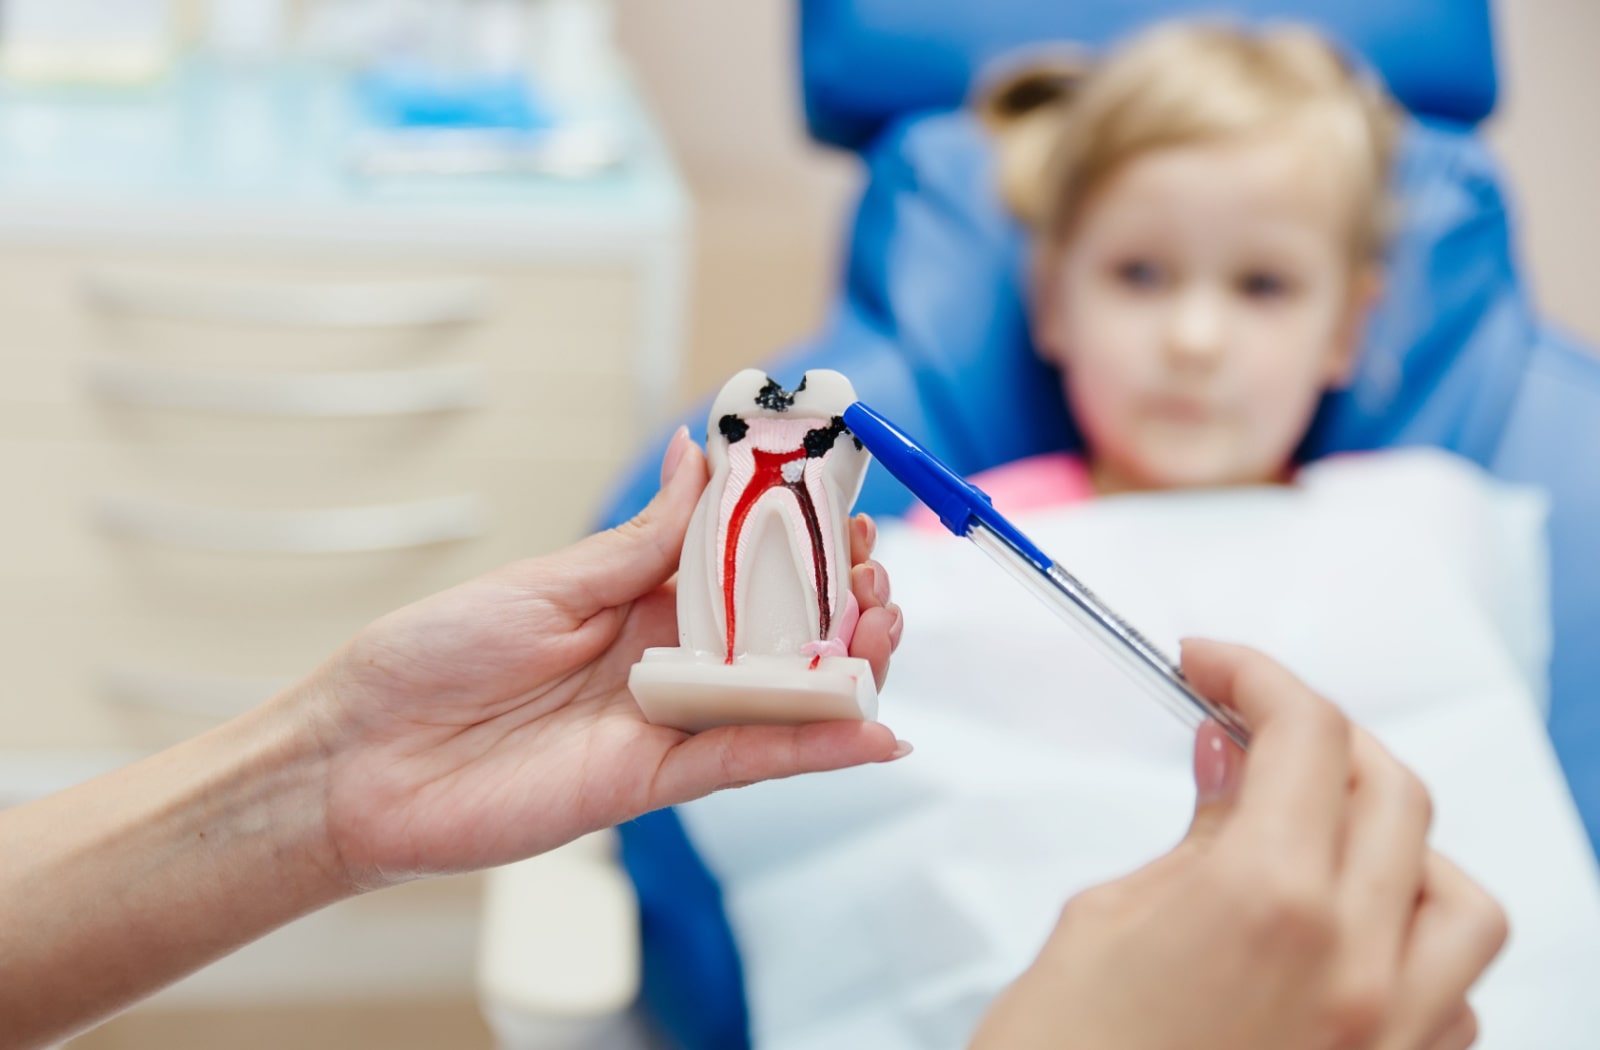 A dentist presenting a cross-section model of a tooth with cavities to a child.